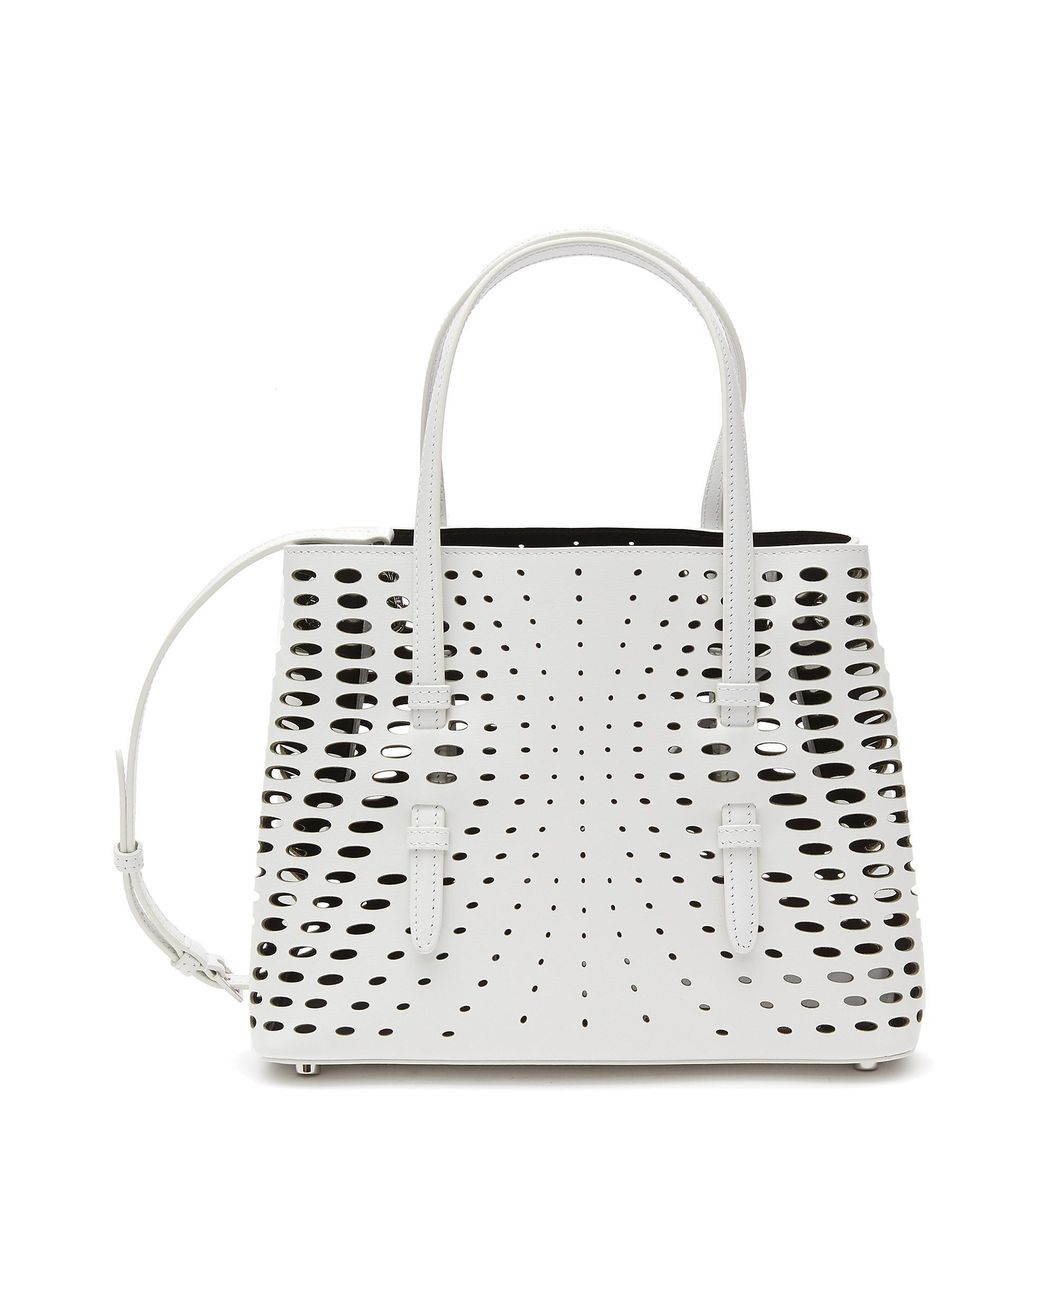 Alaïa 'mina' 25 Vienne Perforated Calfskin Leather Tote Bag in White | Lyst